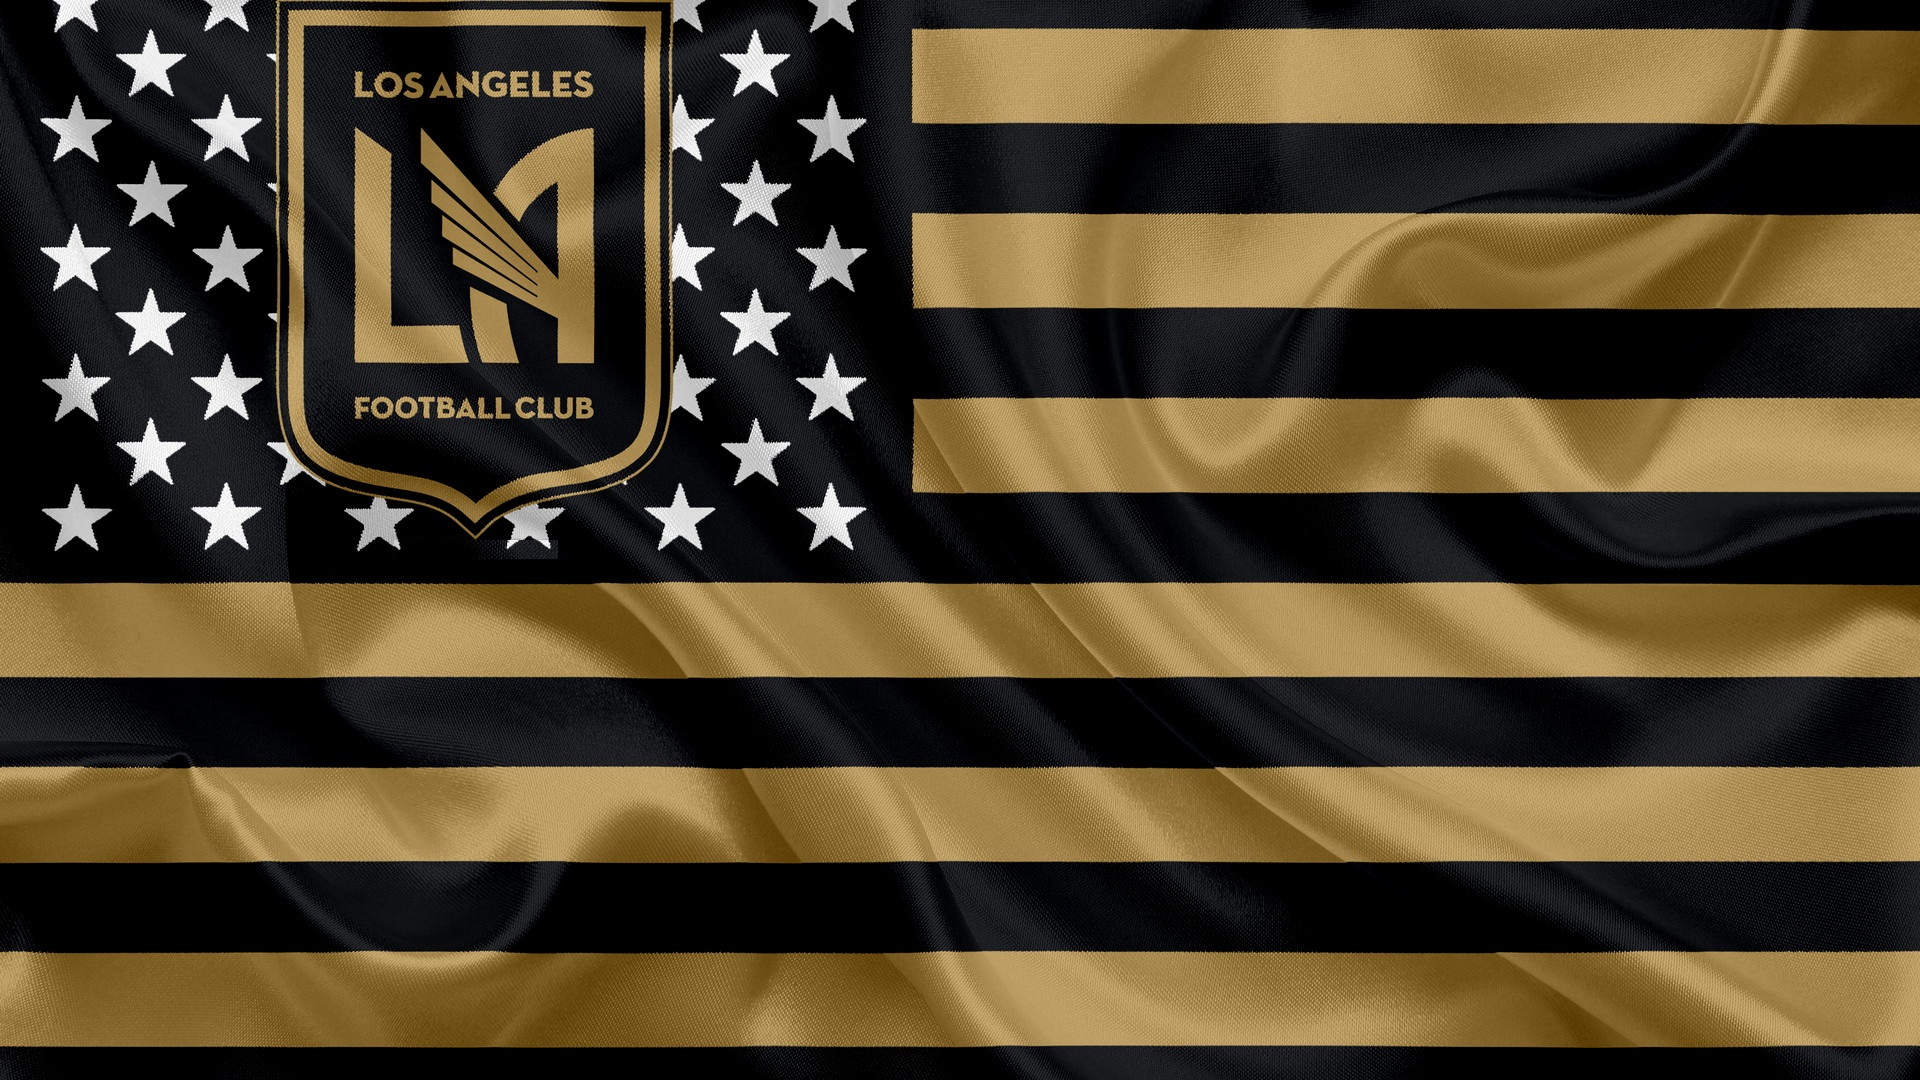 Wallpapers Los Angeles FC with high-resolution 1920x1080 pixel. You can use this wallpaper for your Desktop Computers, Mac Screensavers, Windows Backgrounds, iPhone Wallpapers, Tablet or Android Lock screen and another Mobile device